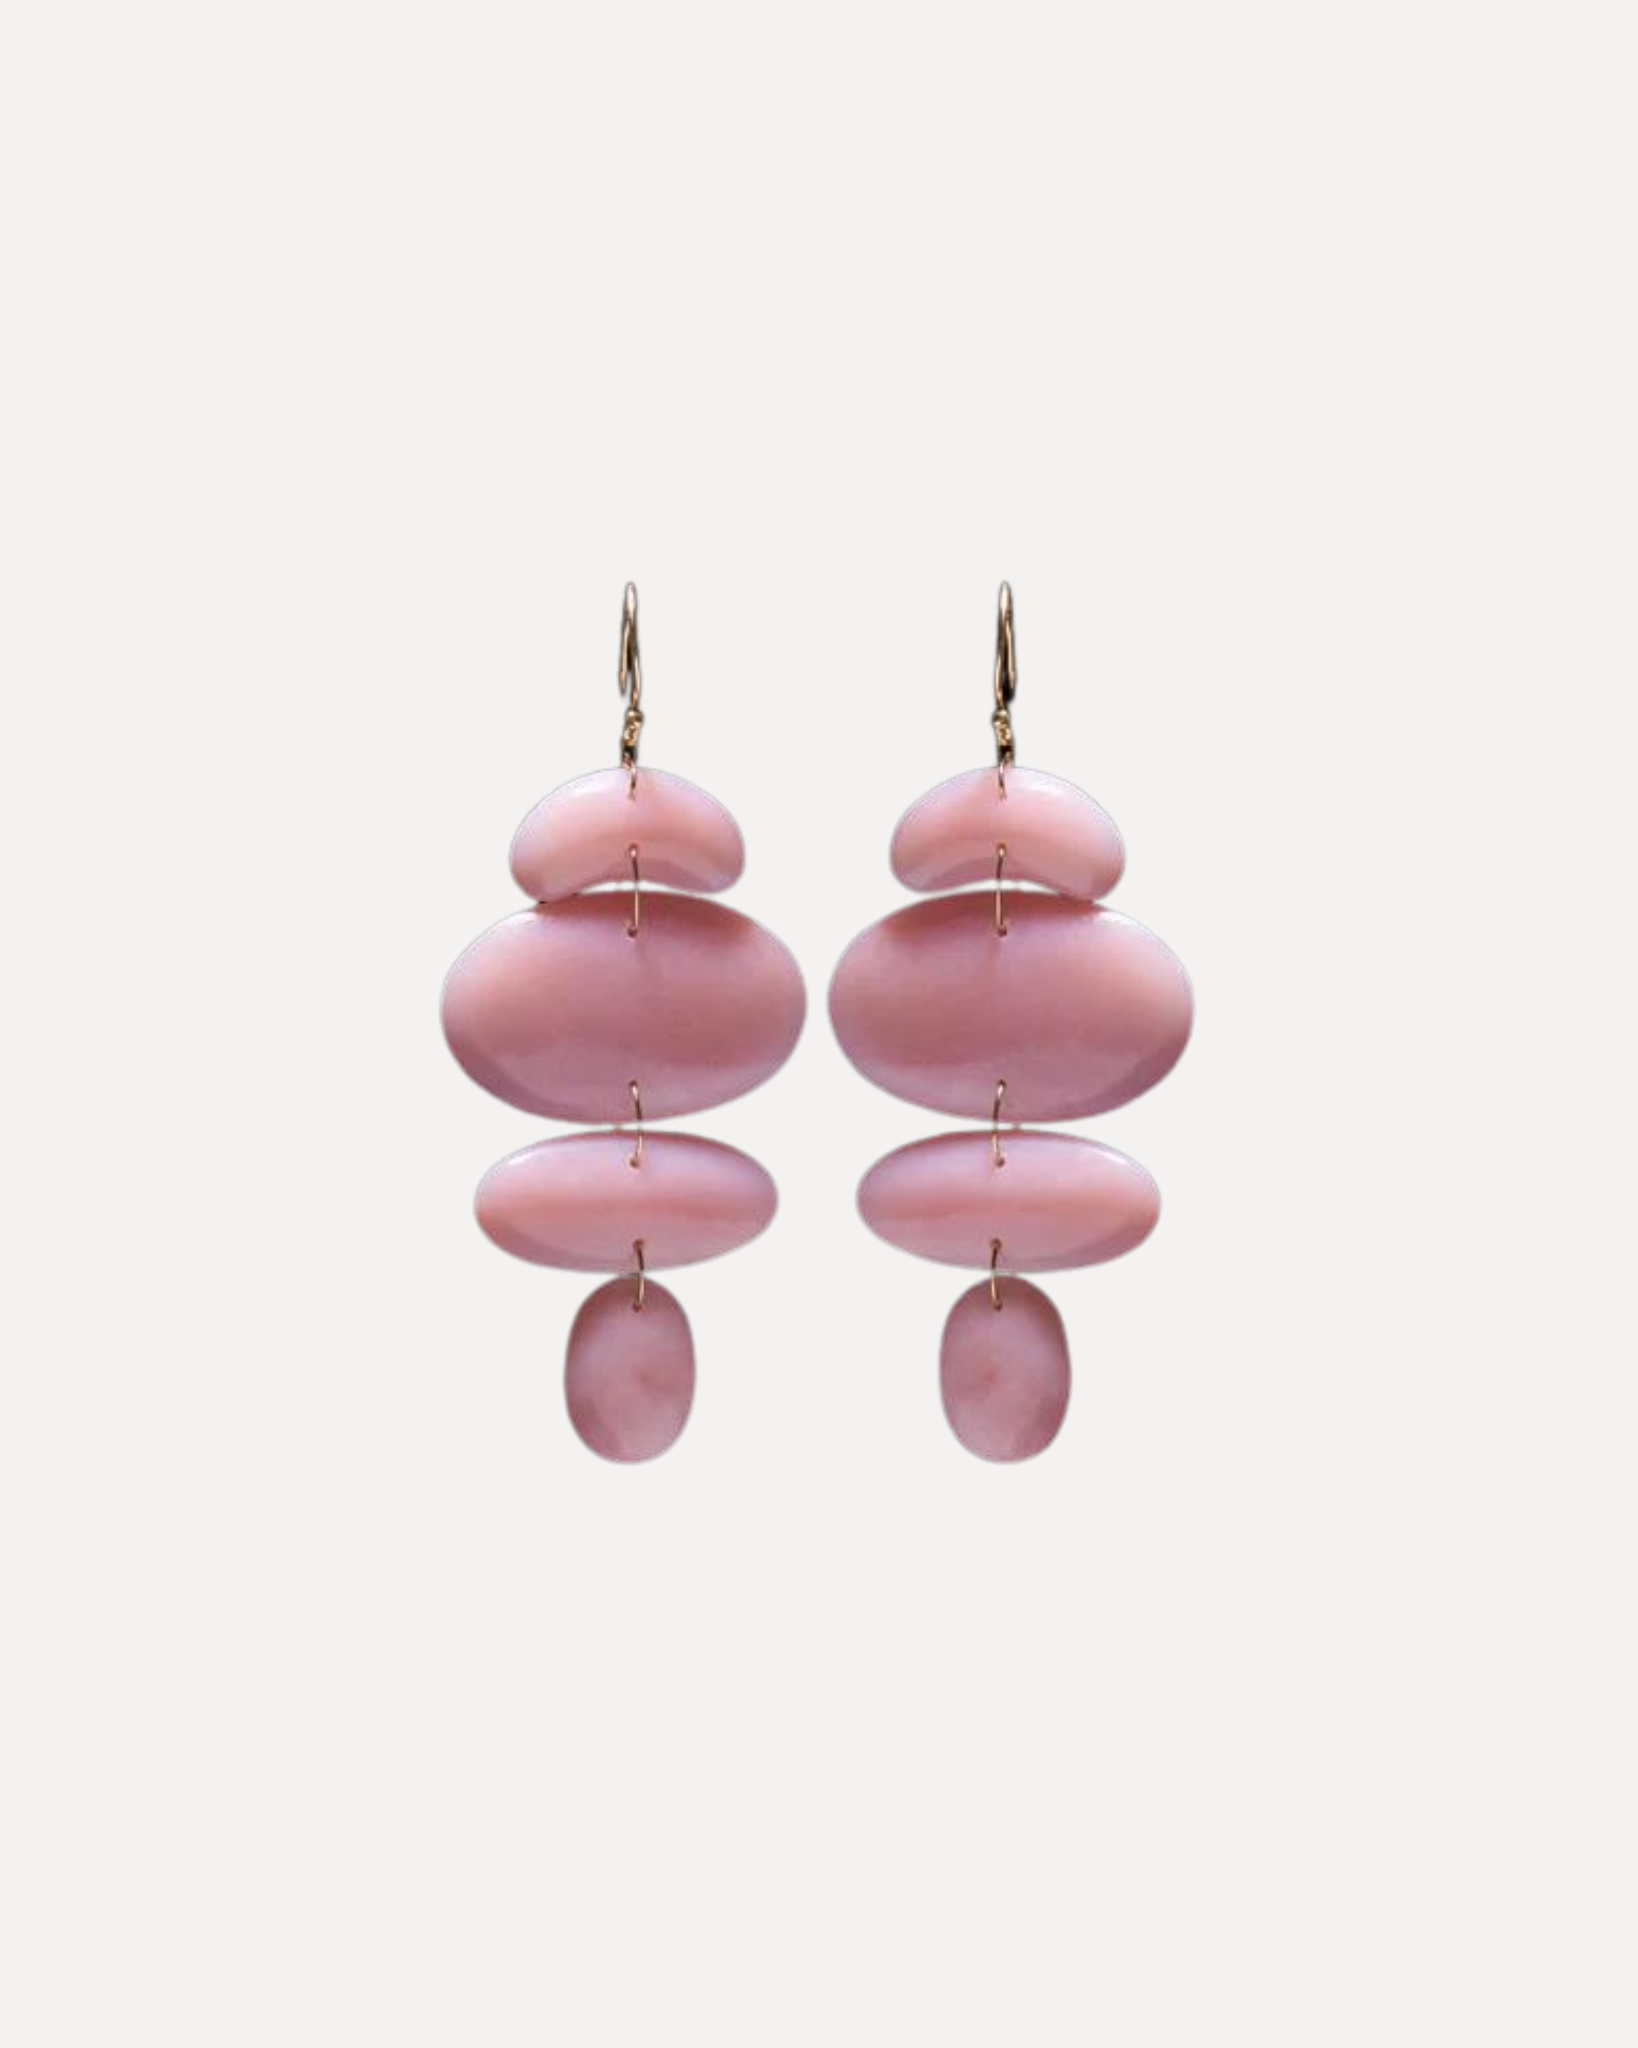 Oval Totems Earring